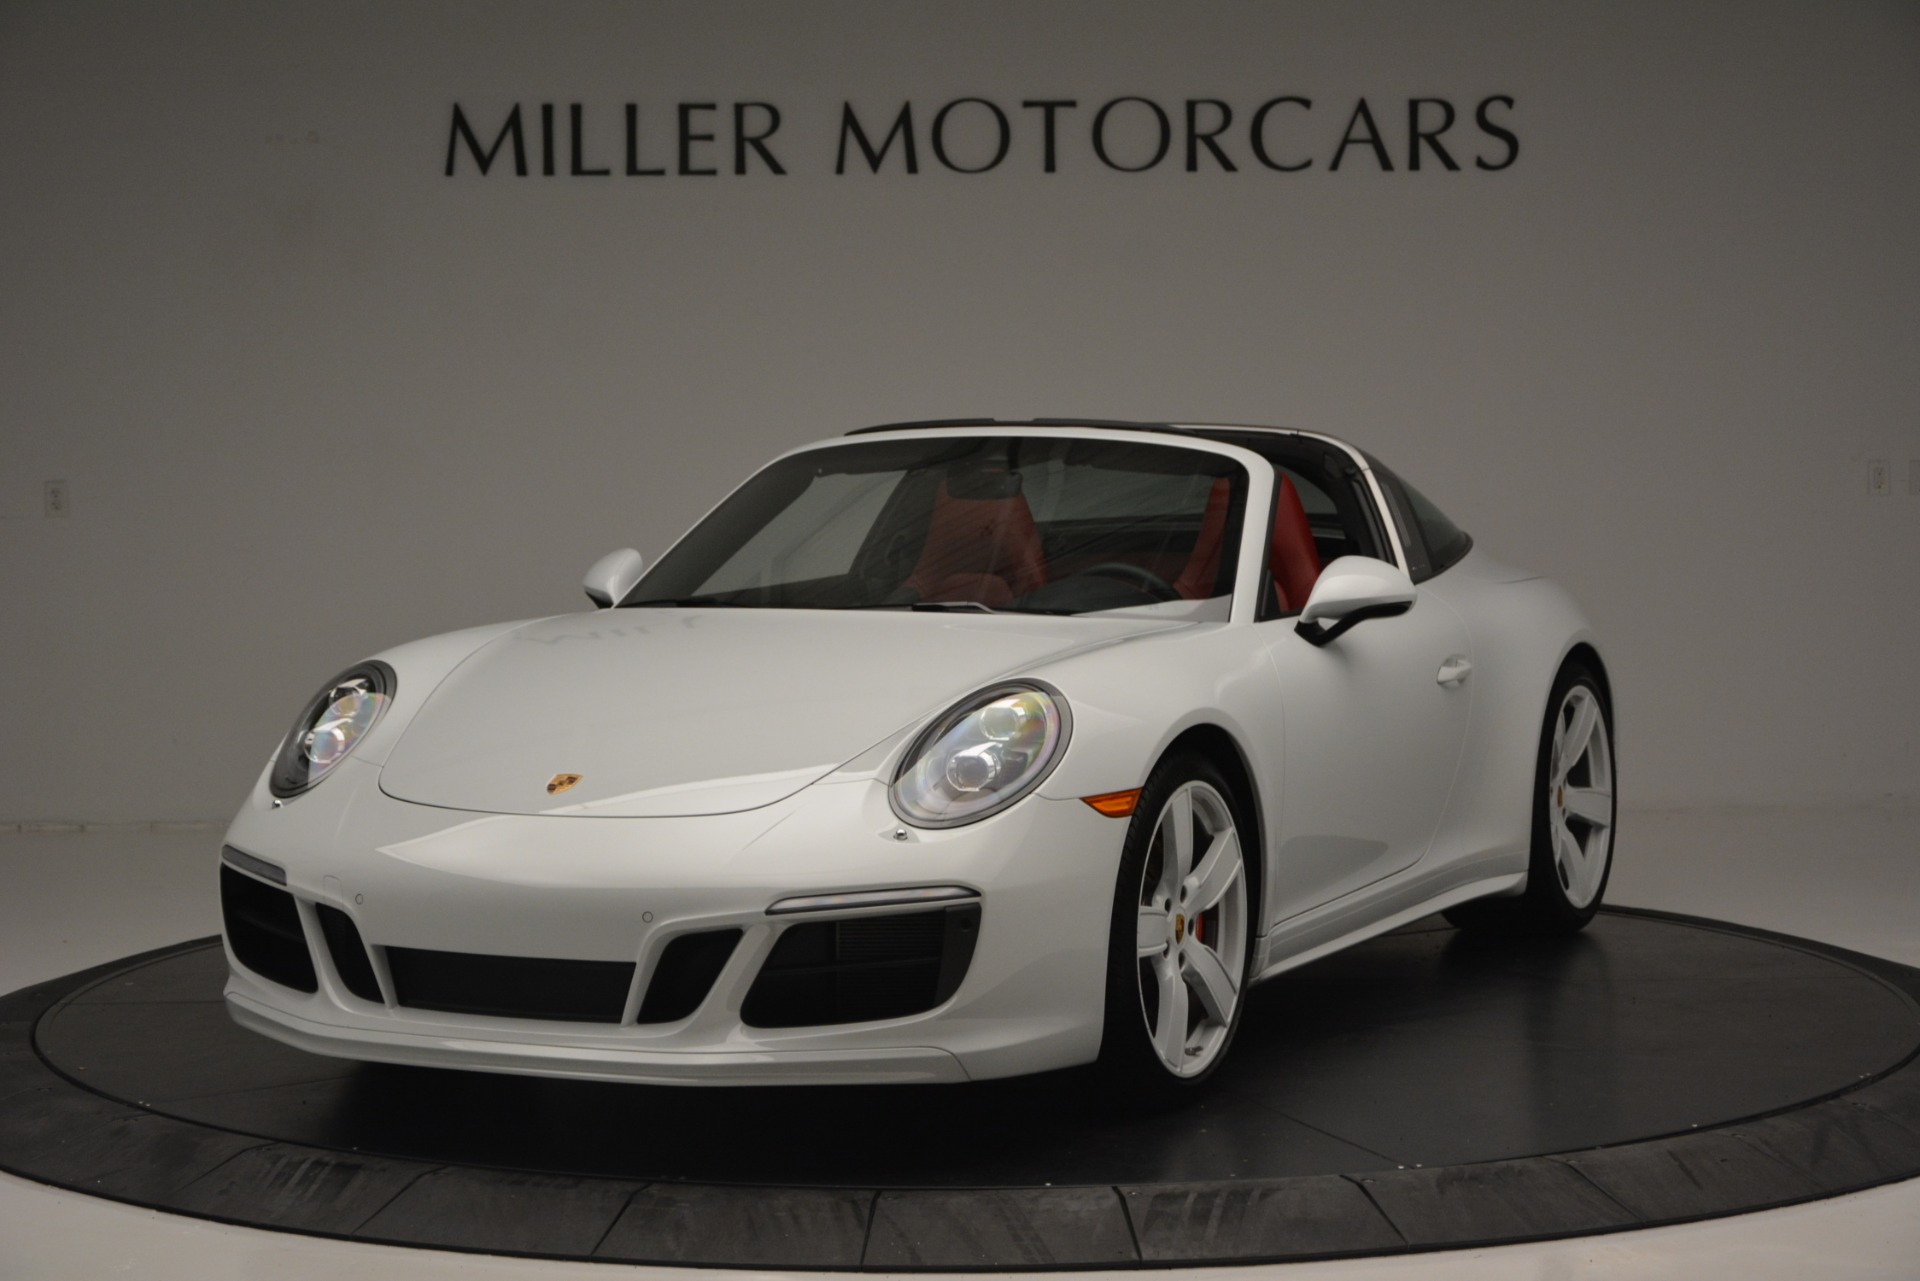 Used 2017 Porsche 911 Targa 4S for sale Sold at Aston Martin of Greenwich in Greenwich CT 06830 1